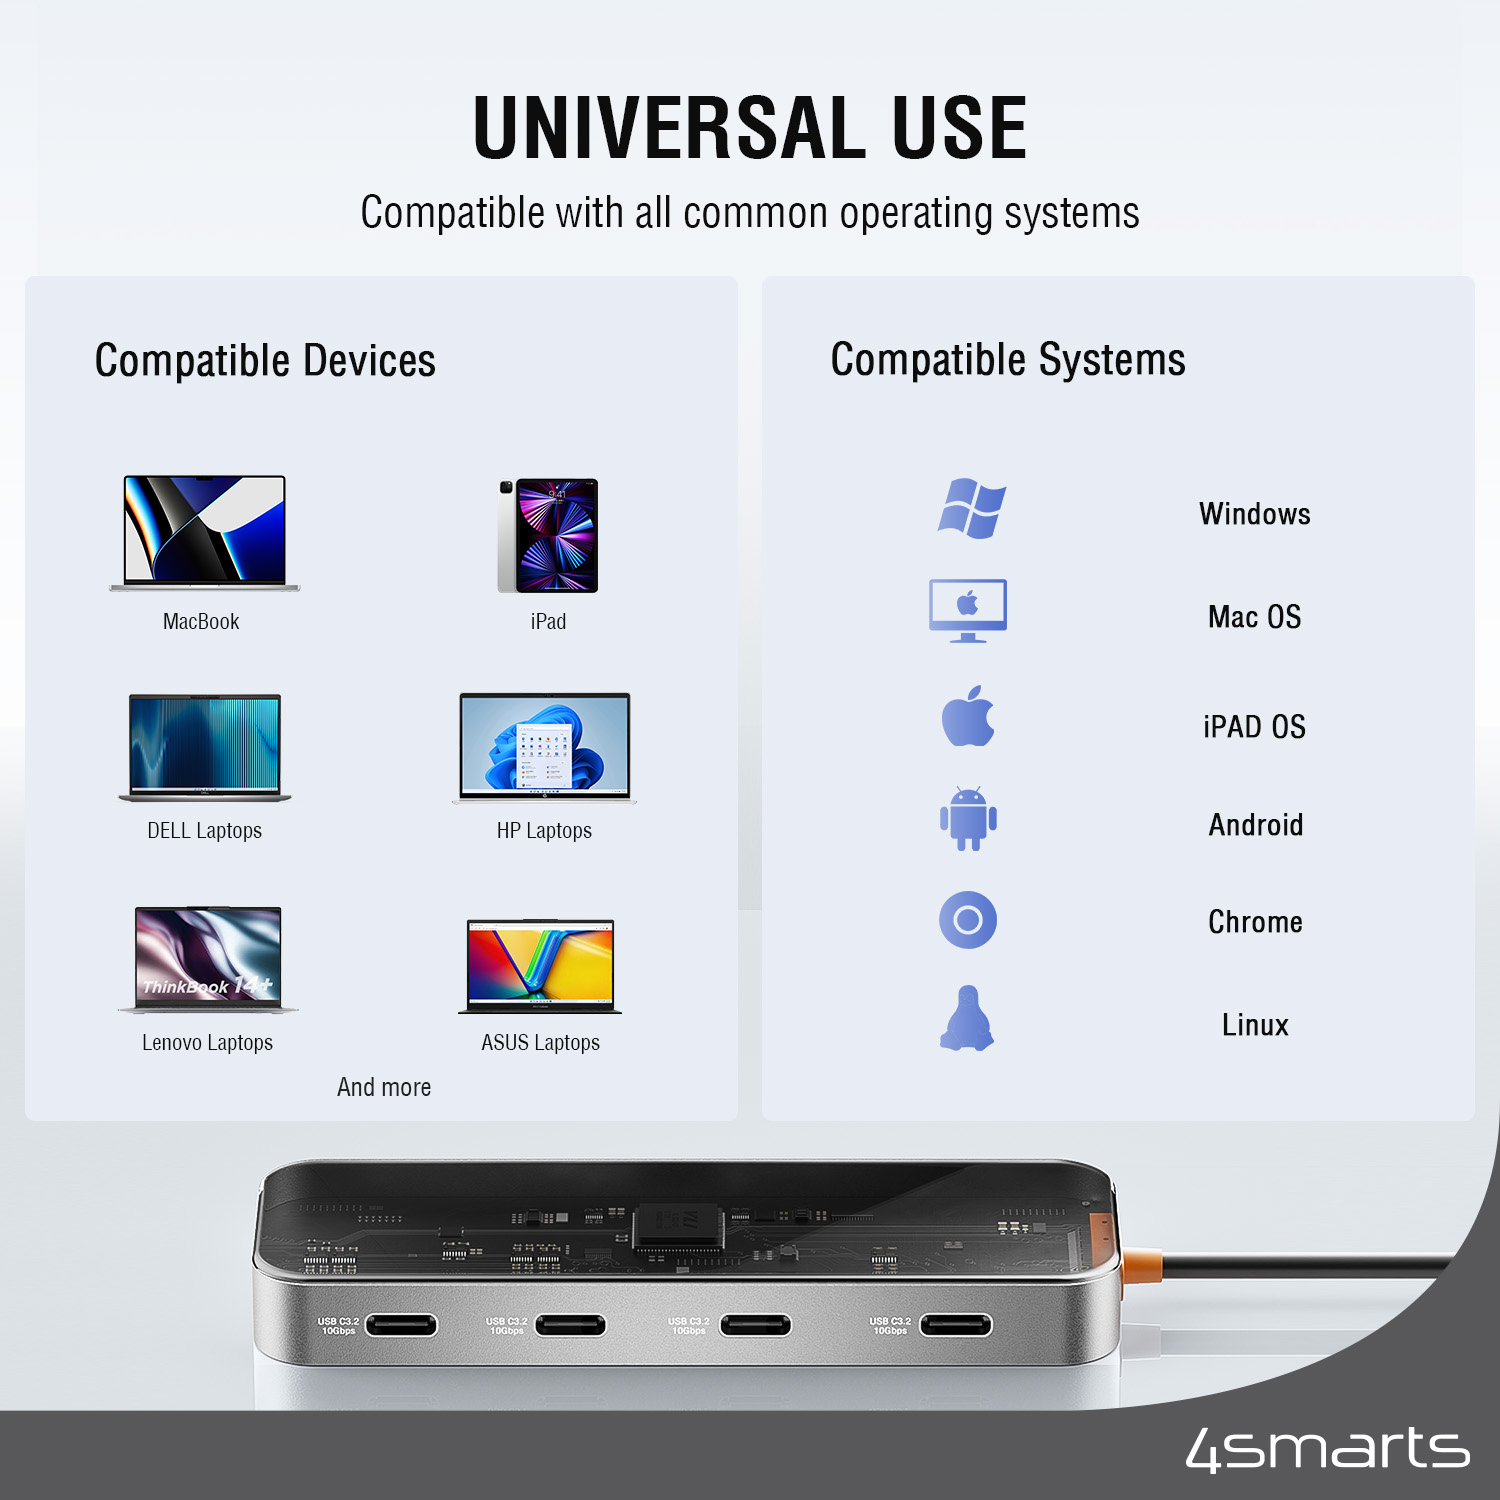 4smarts USB Hub C is universally usable and compatible with all major operating systems.